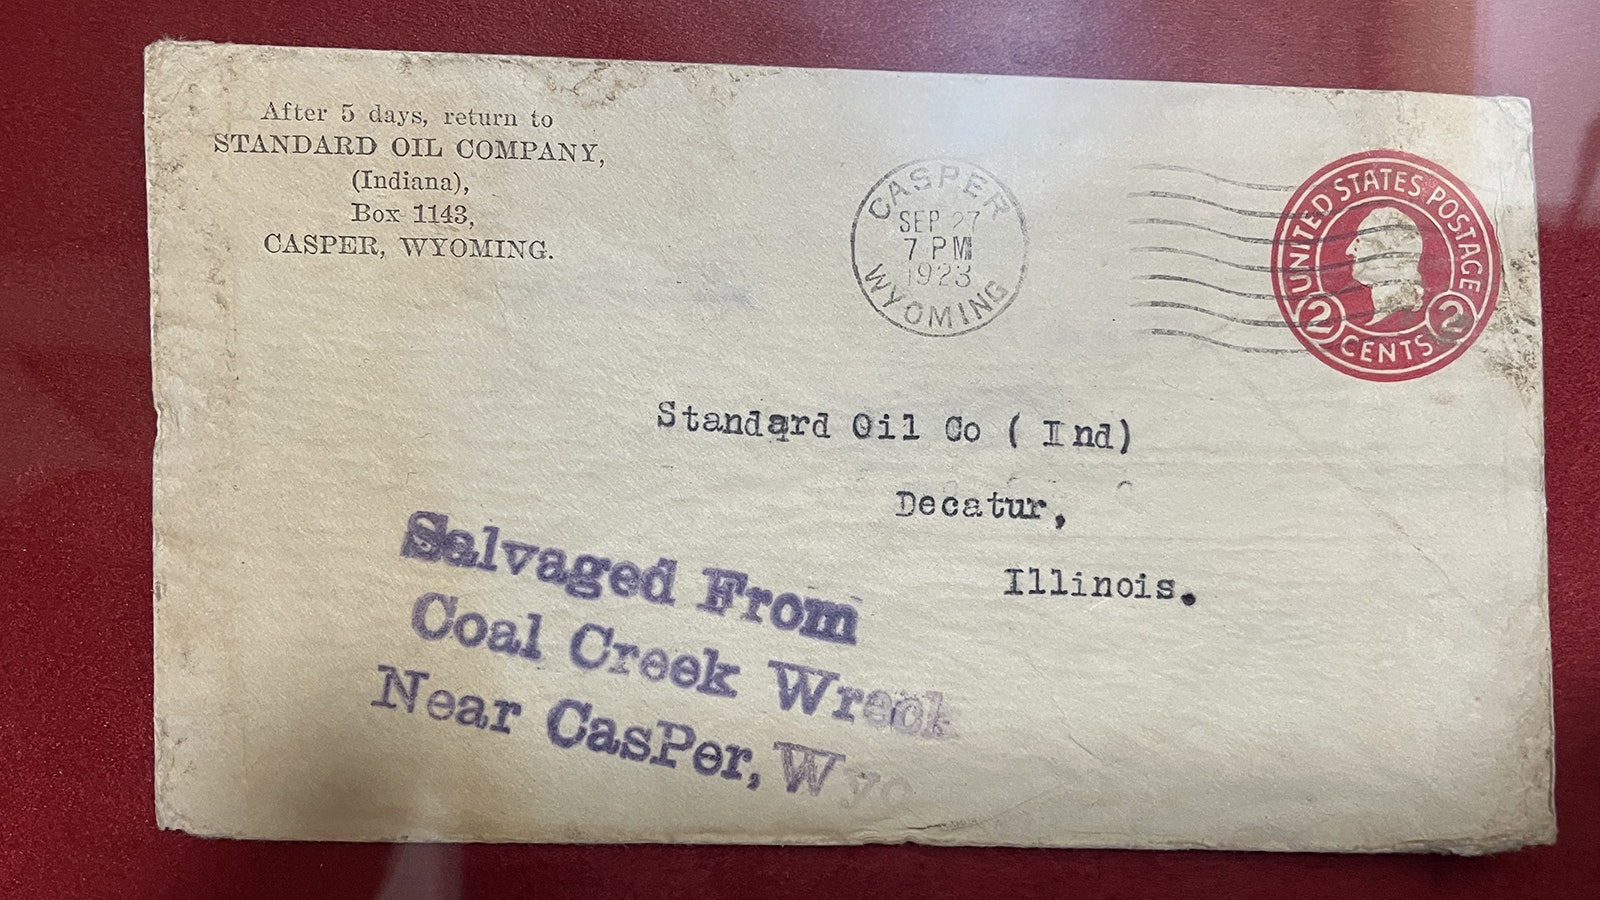 This letter addressed to Standard Oil in Indiana is one of the few artifacts that remain from the infamous Cole Creek train wreck.